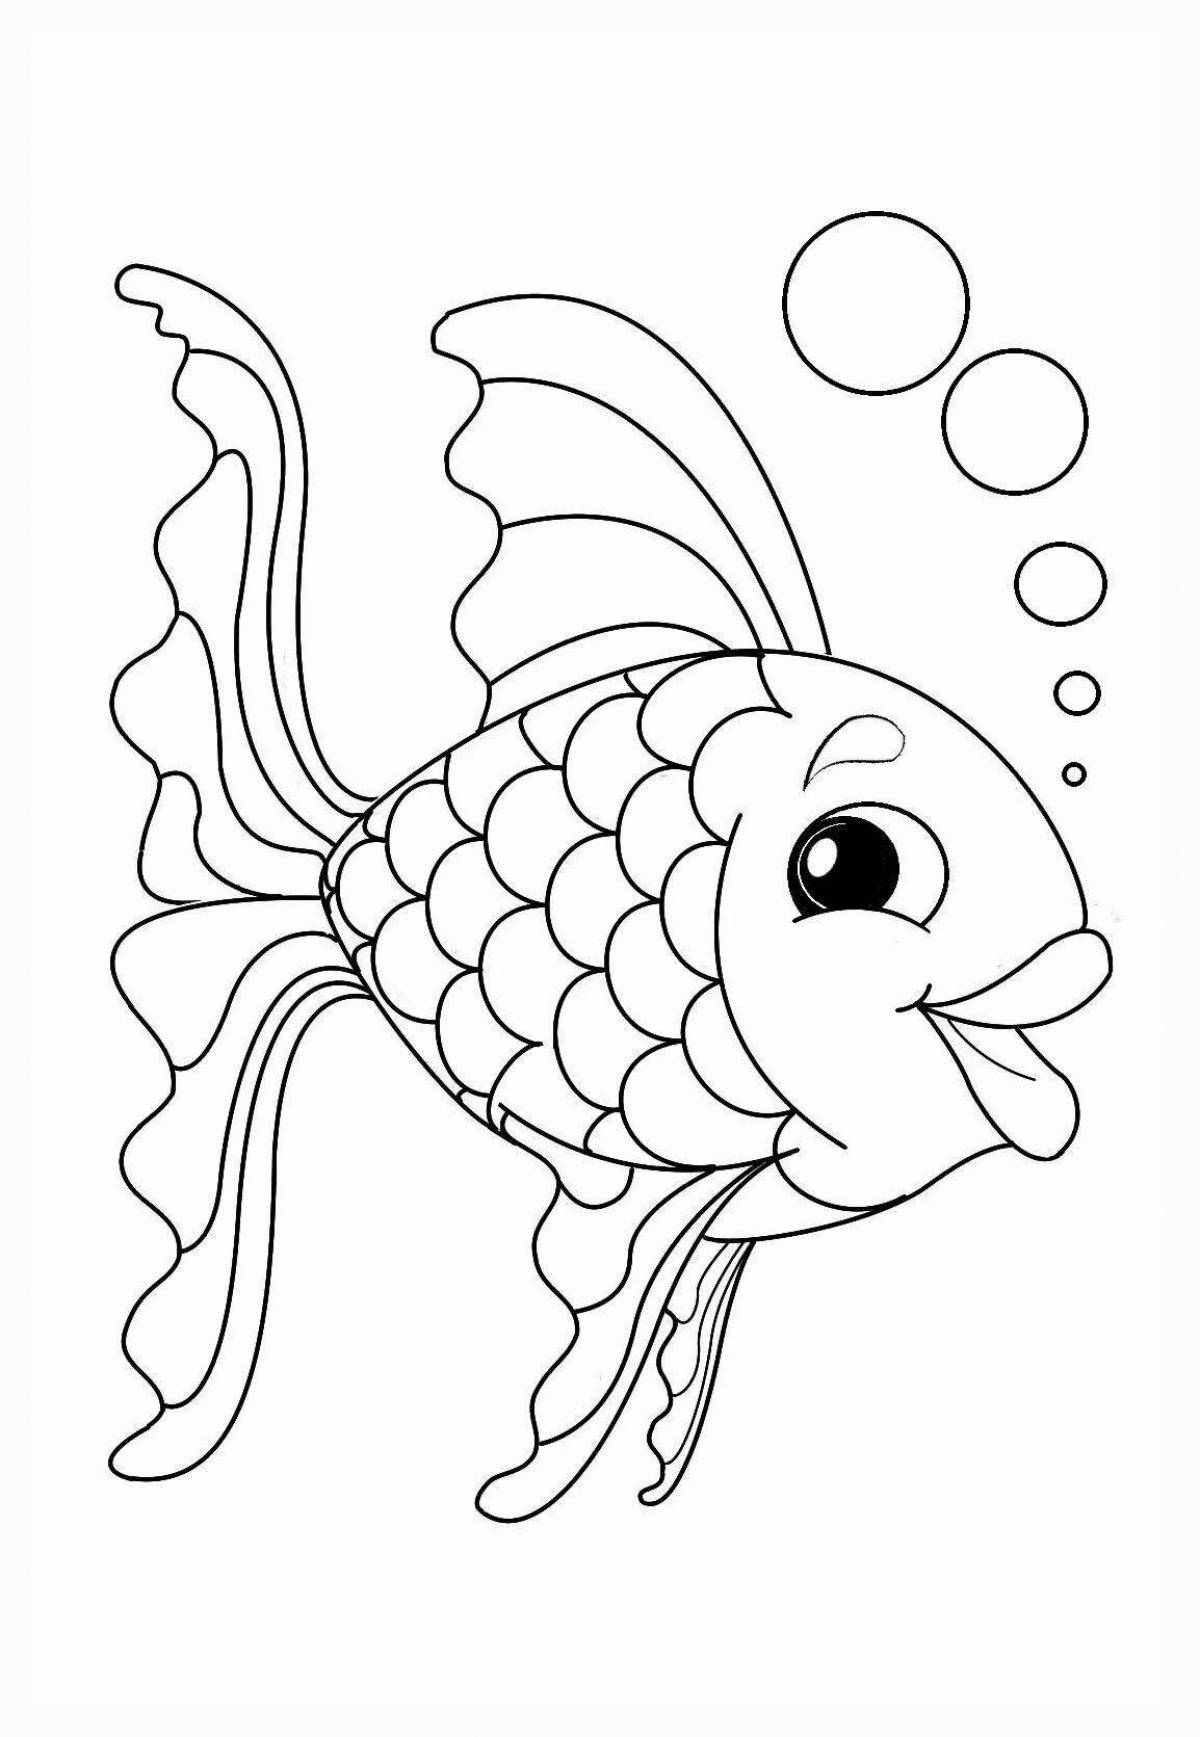 Cute goldfish coloring pages for kids